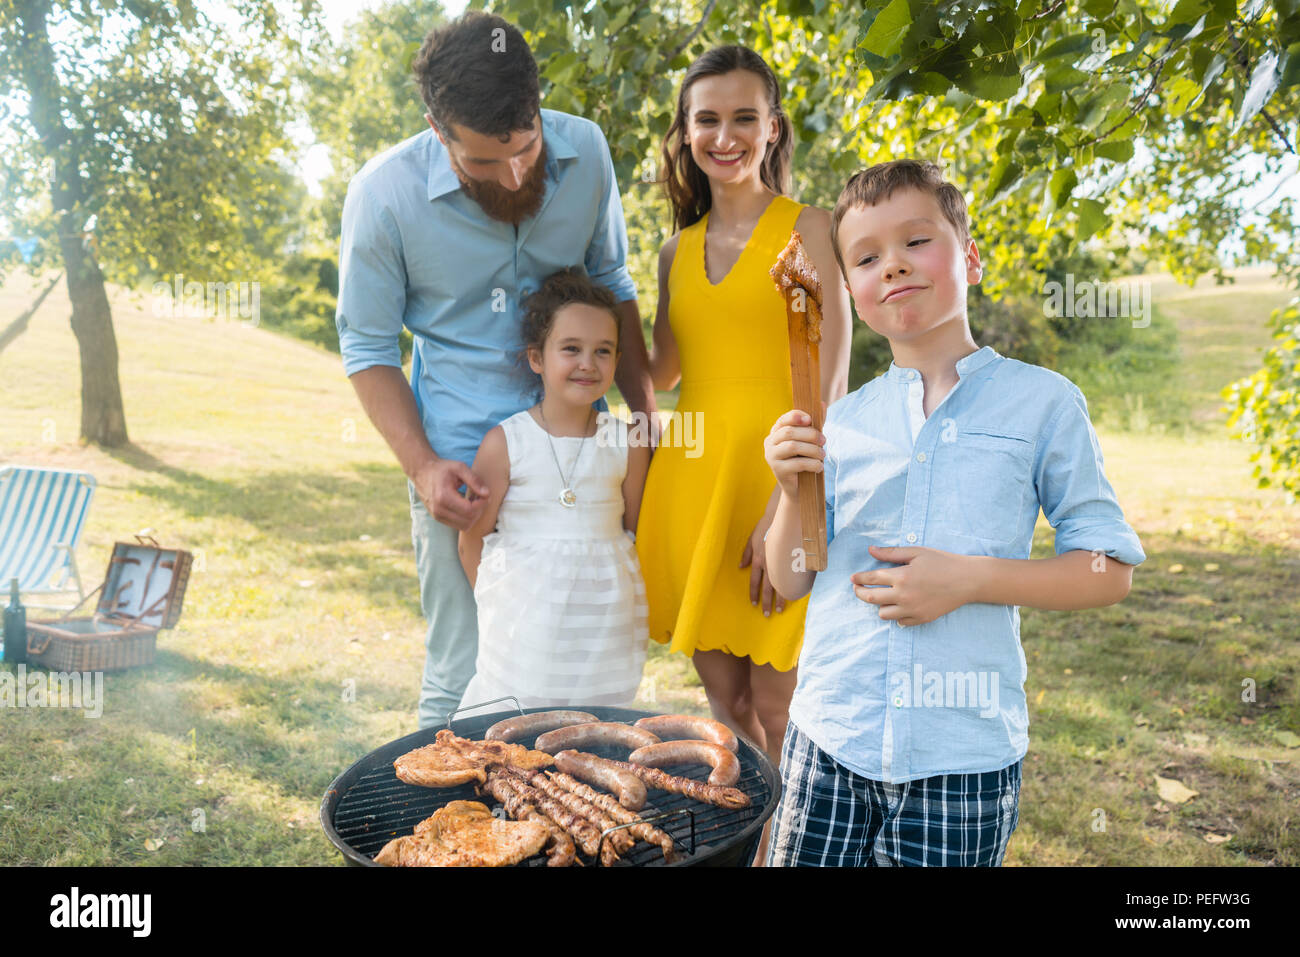 Portrait of happy family with two children standing outdoors near a barbecue Stock Photo